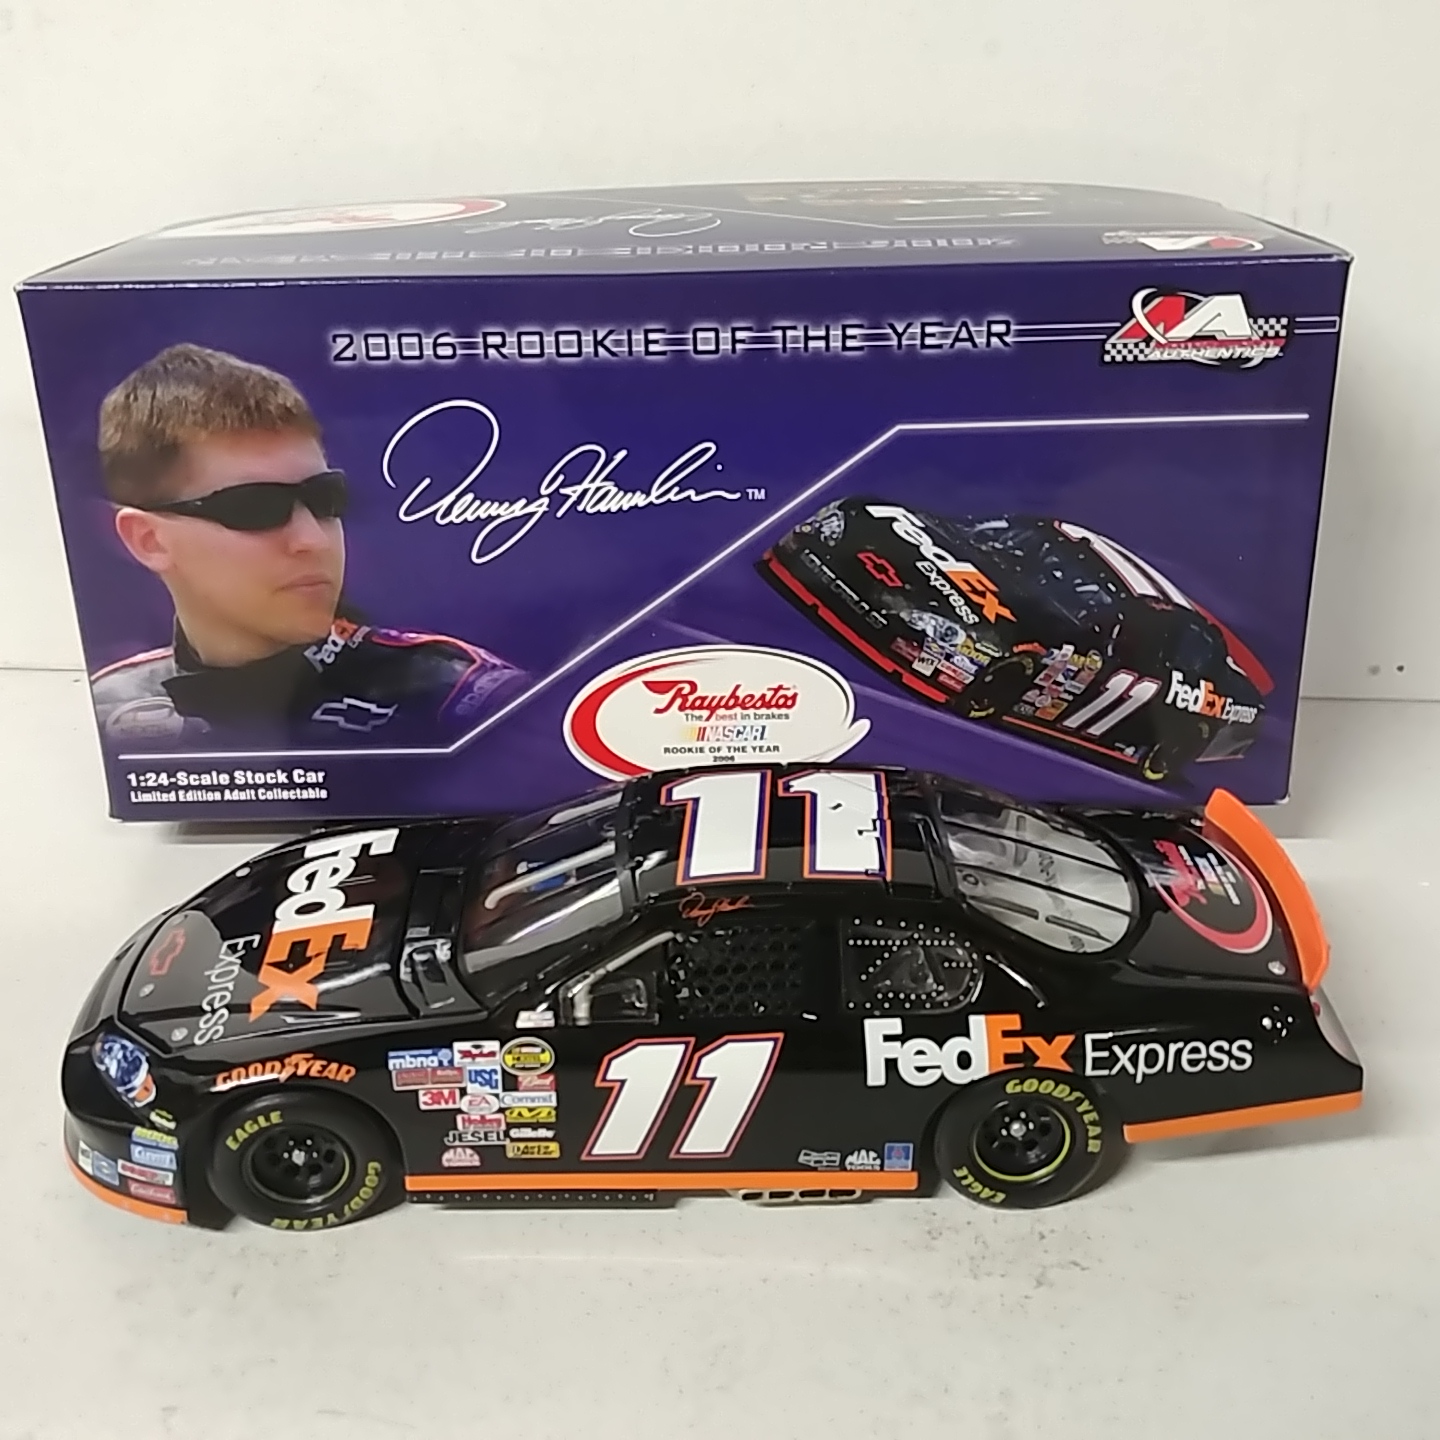 2006 Denny Hamlin 1/24th Fed Ex Express "Rookie of the Year" Monte Carlo SS